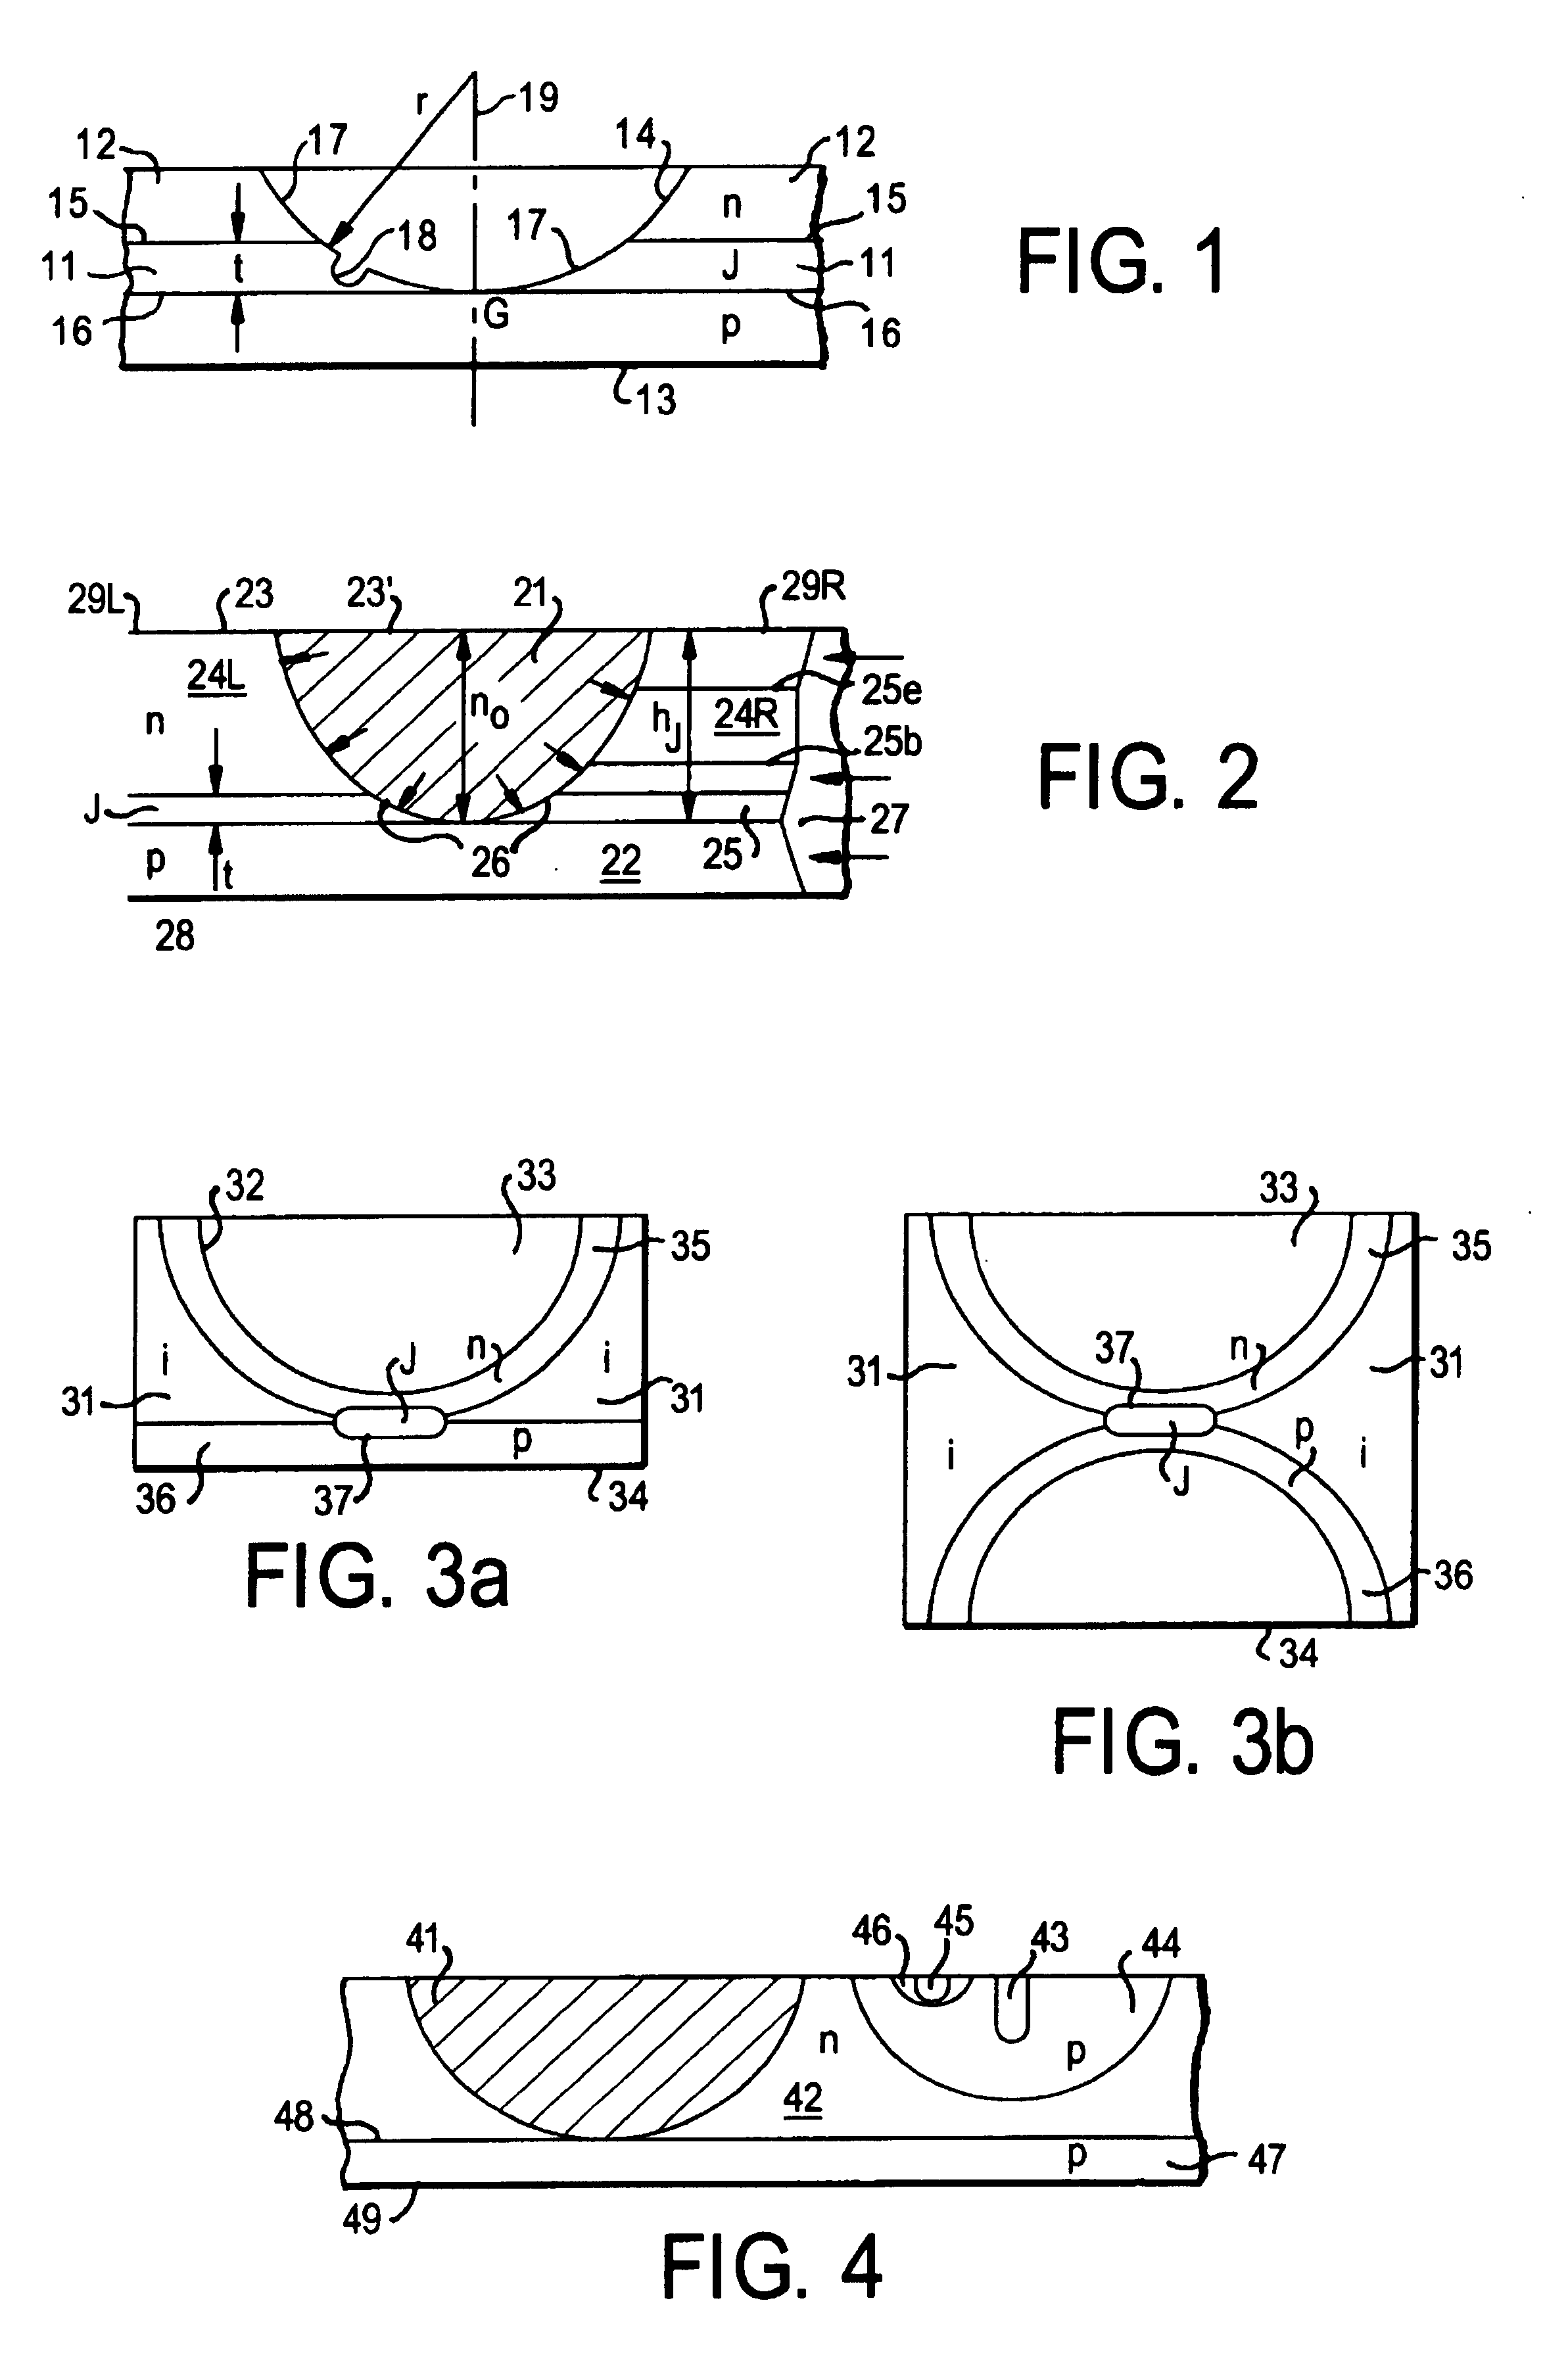 Solid-state device